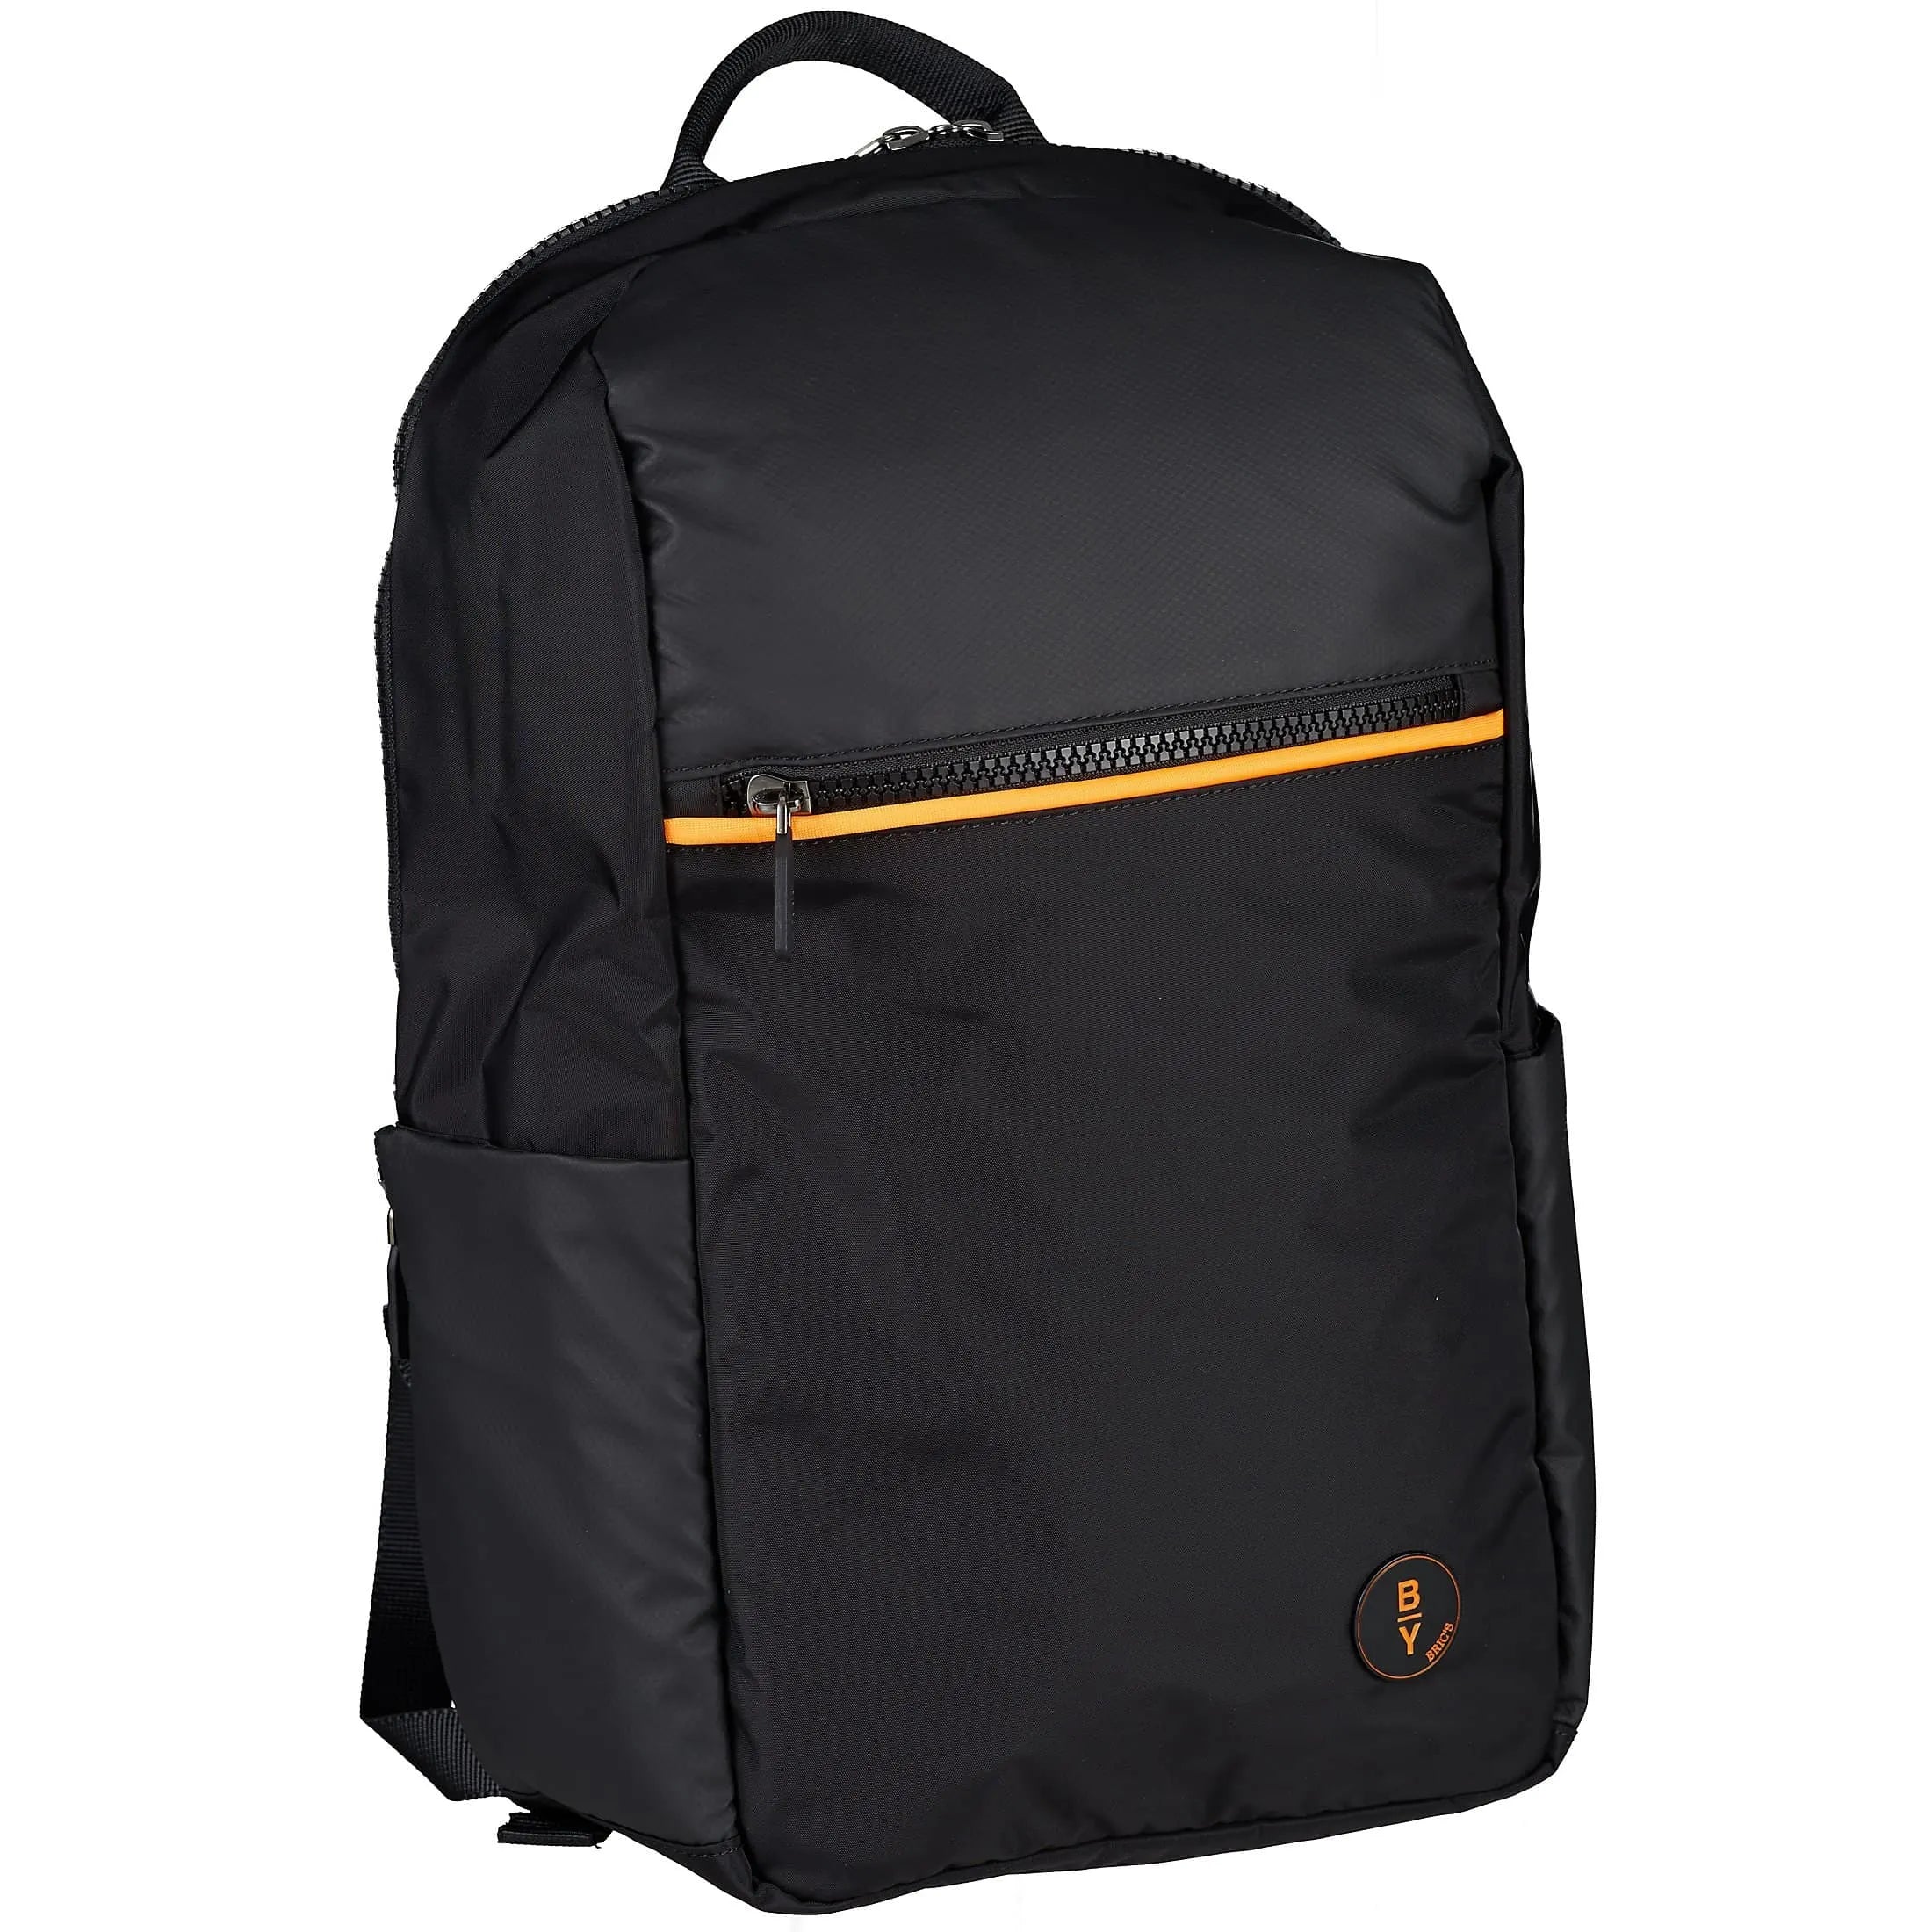 BY by Brics Eolo Urban backpack 43 cm - black